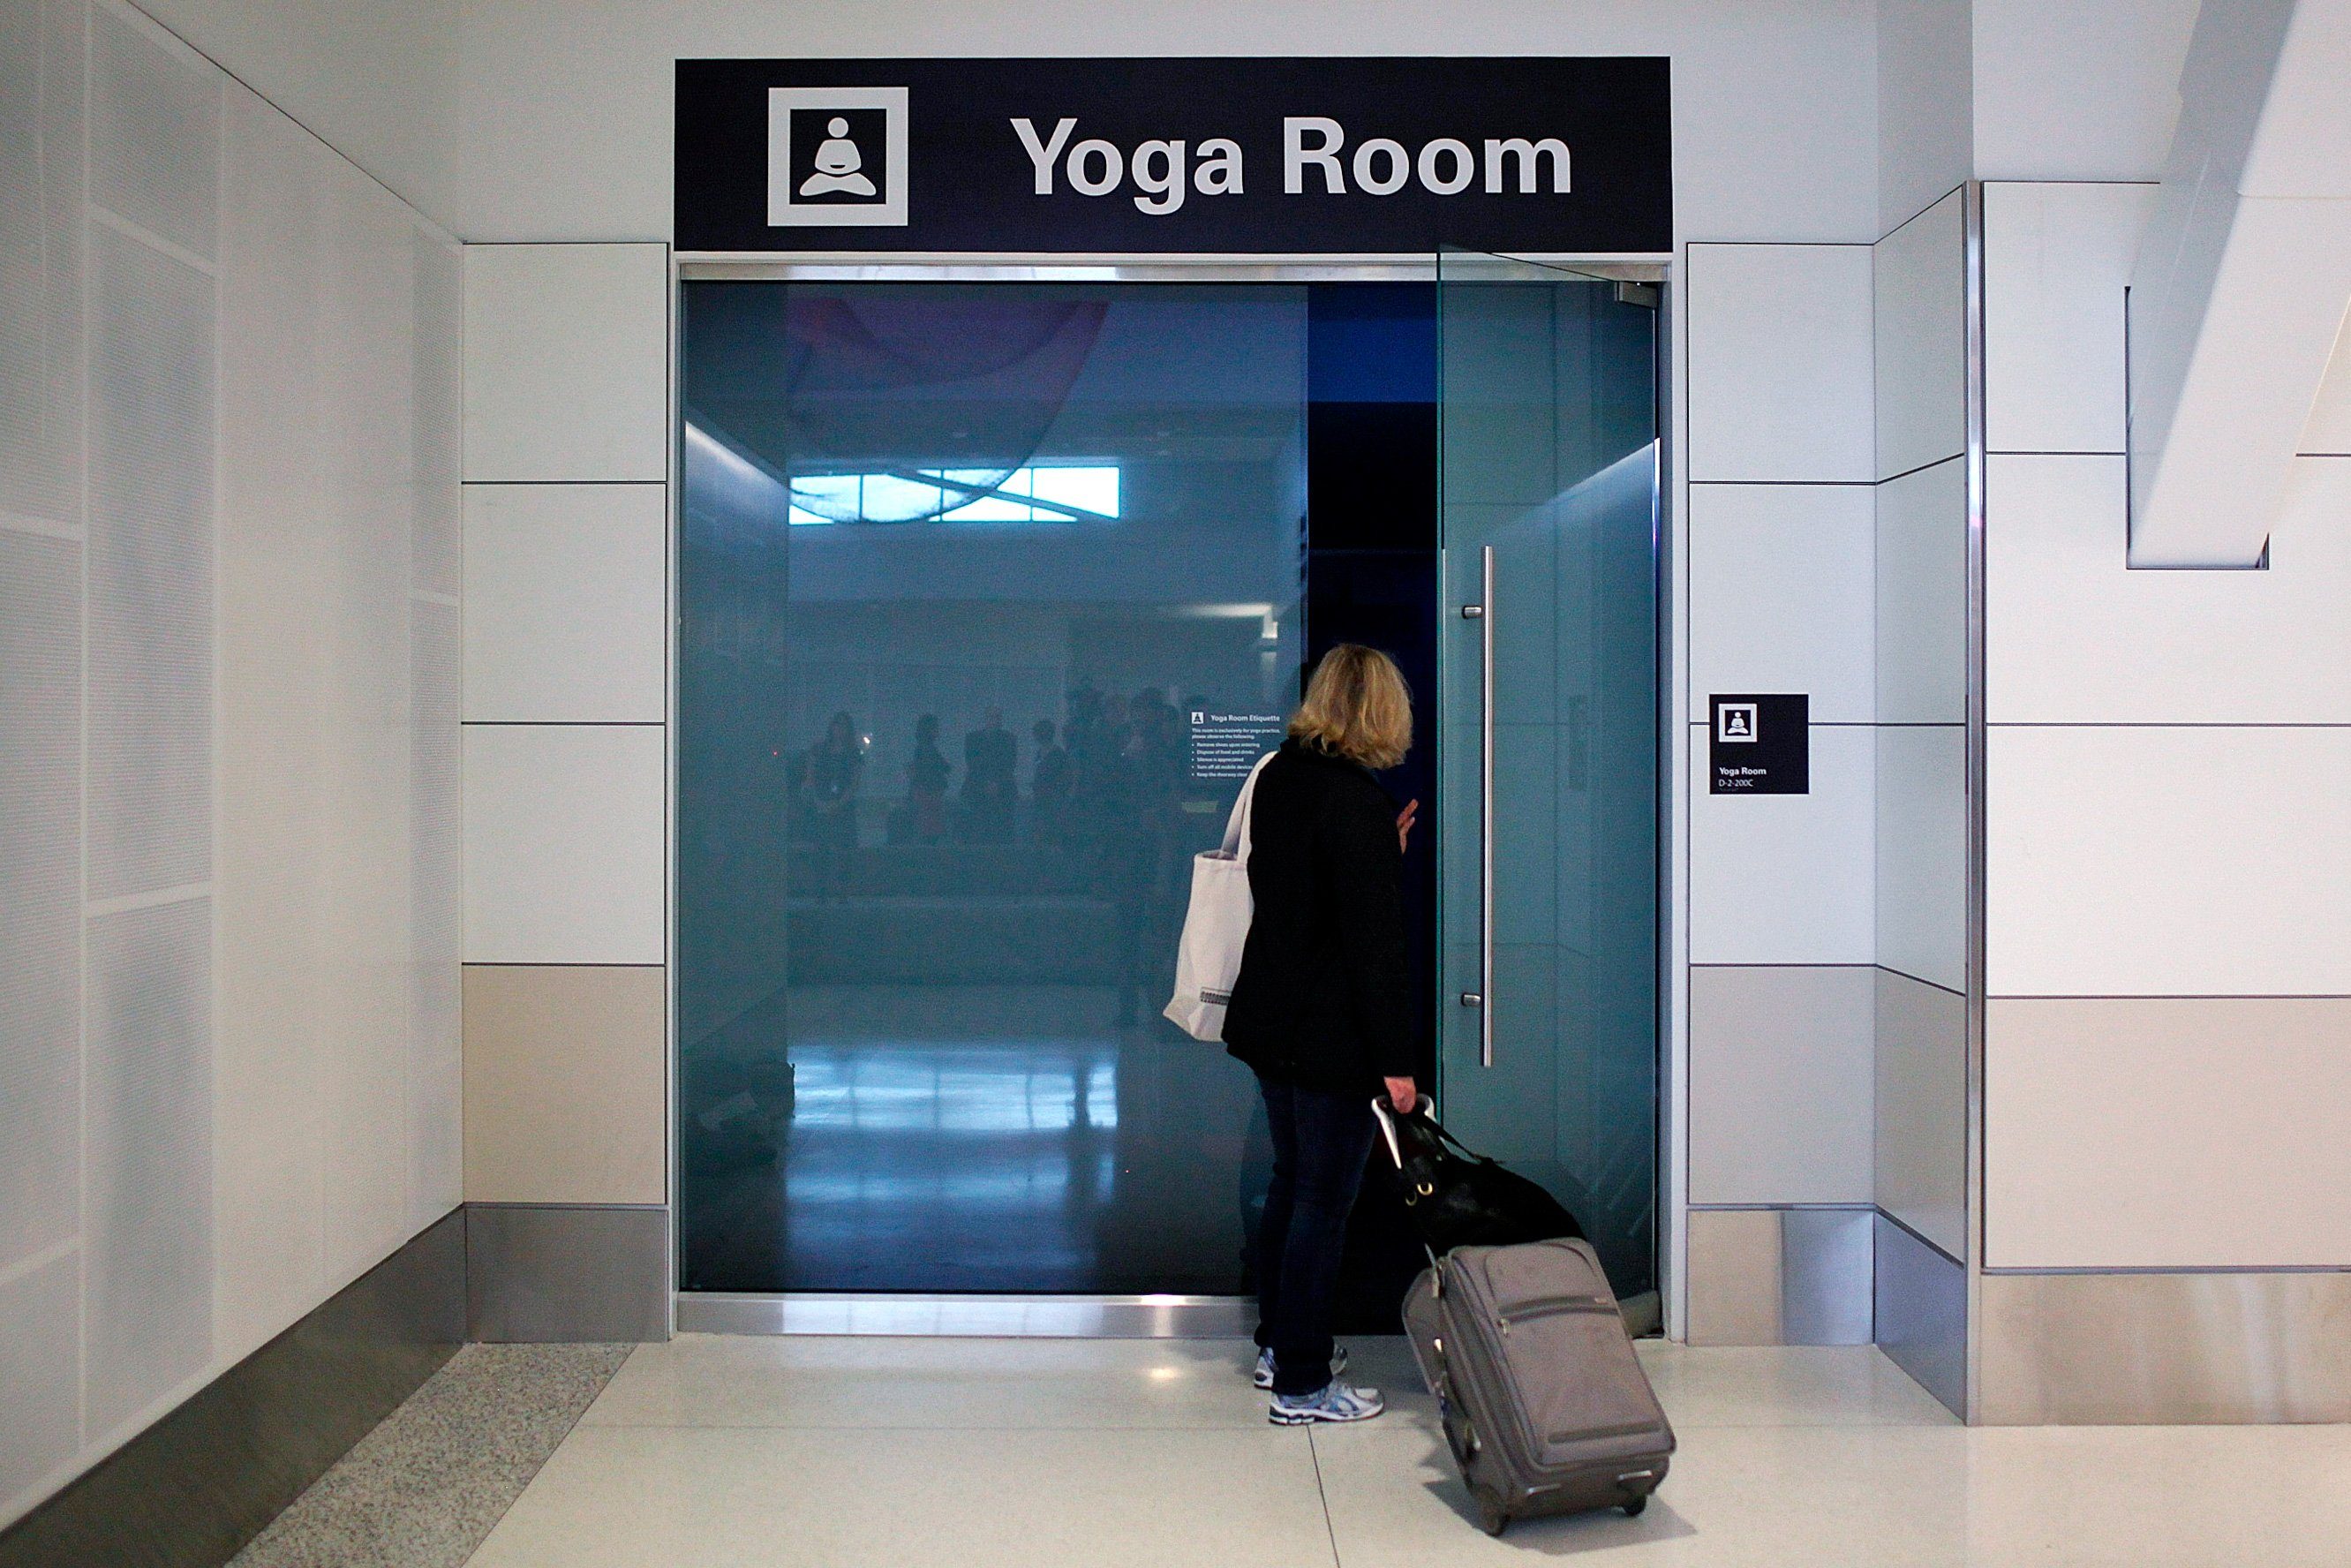 A traveler stops to look inside the new Yoga Room at San Francisco International Airport's terminal two on January 26, 2012 in San Francisco, California.